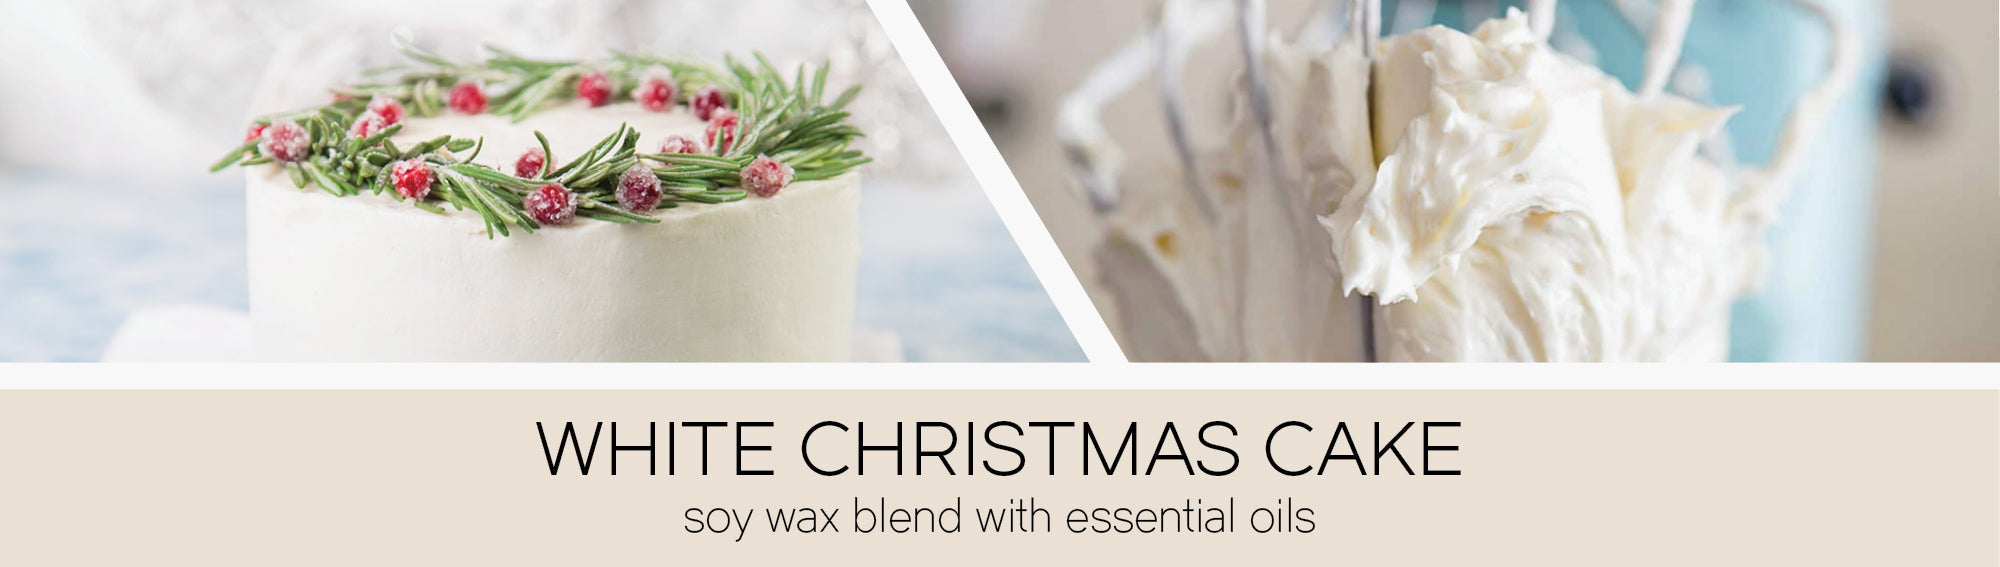 White Christmas Cake Wax Melt - Warm and Inviting Fragrance for